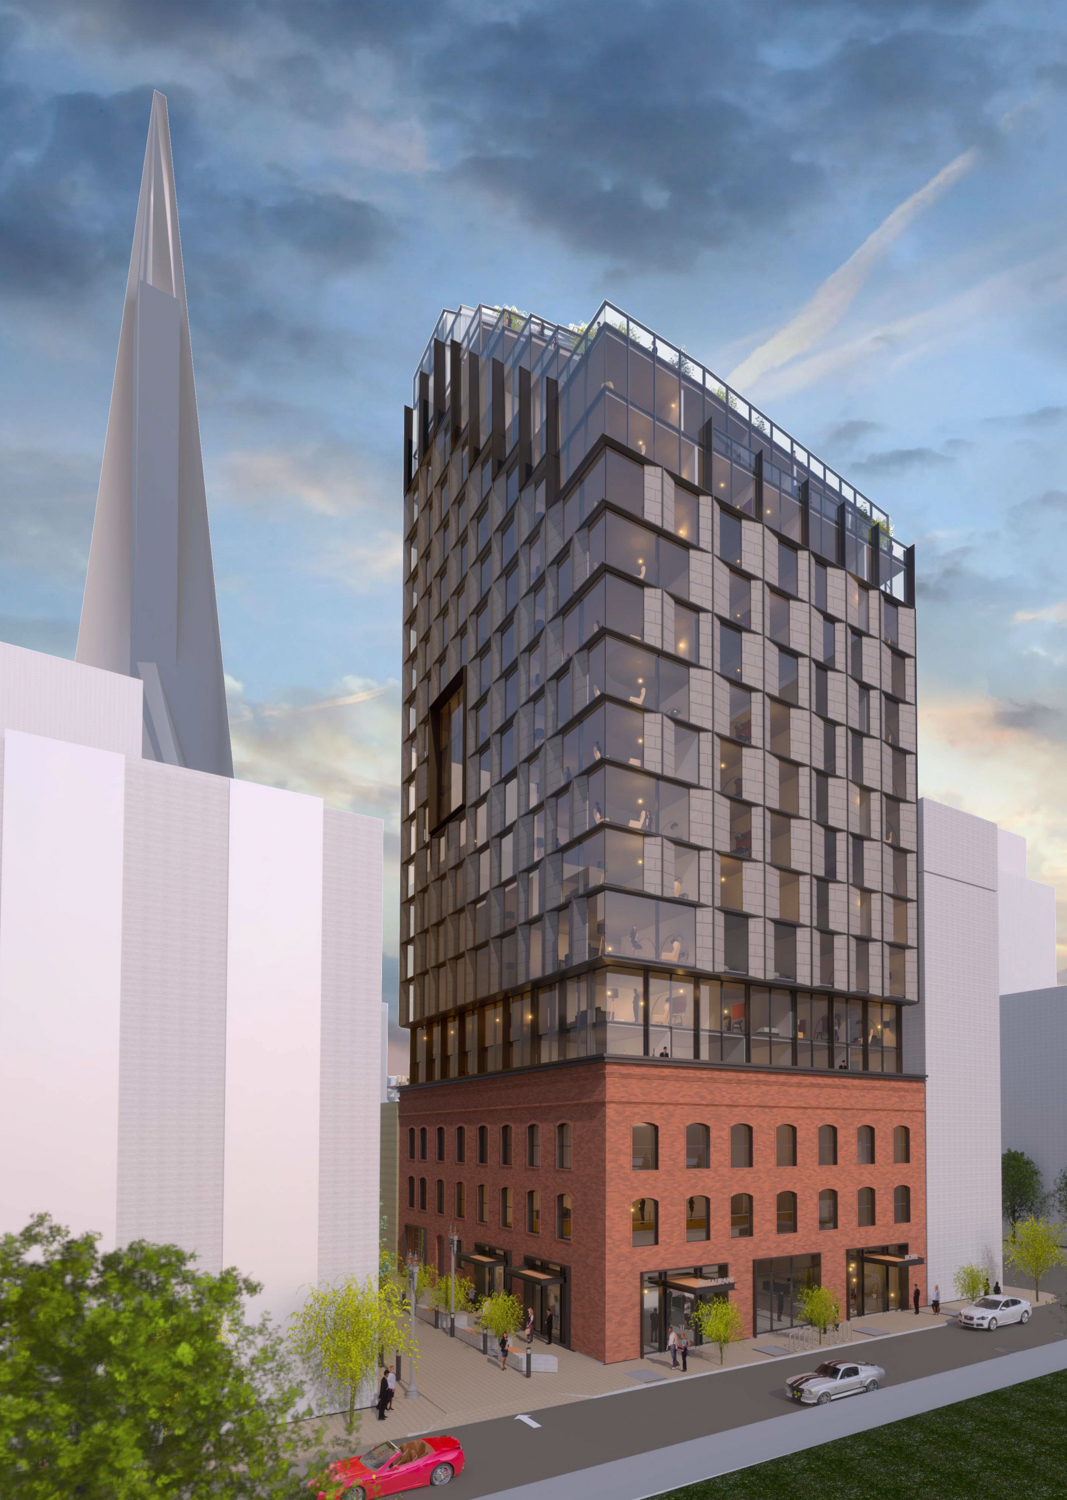 447 Battery Street proposal, rendering by Heller Manus Architects